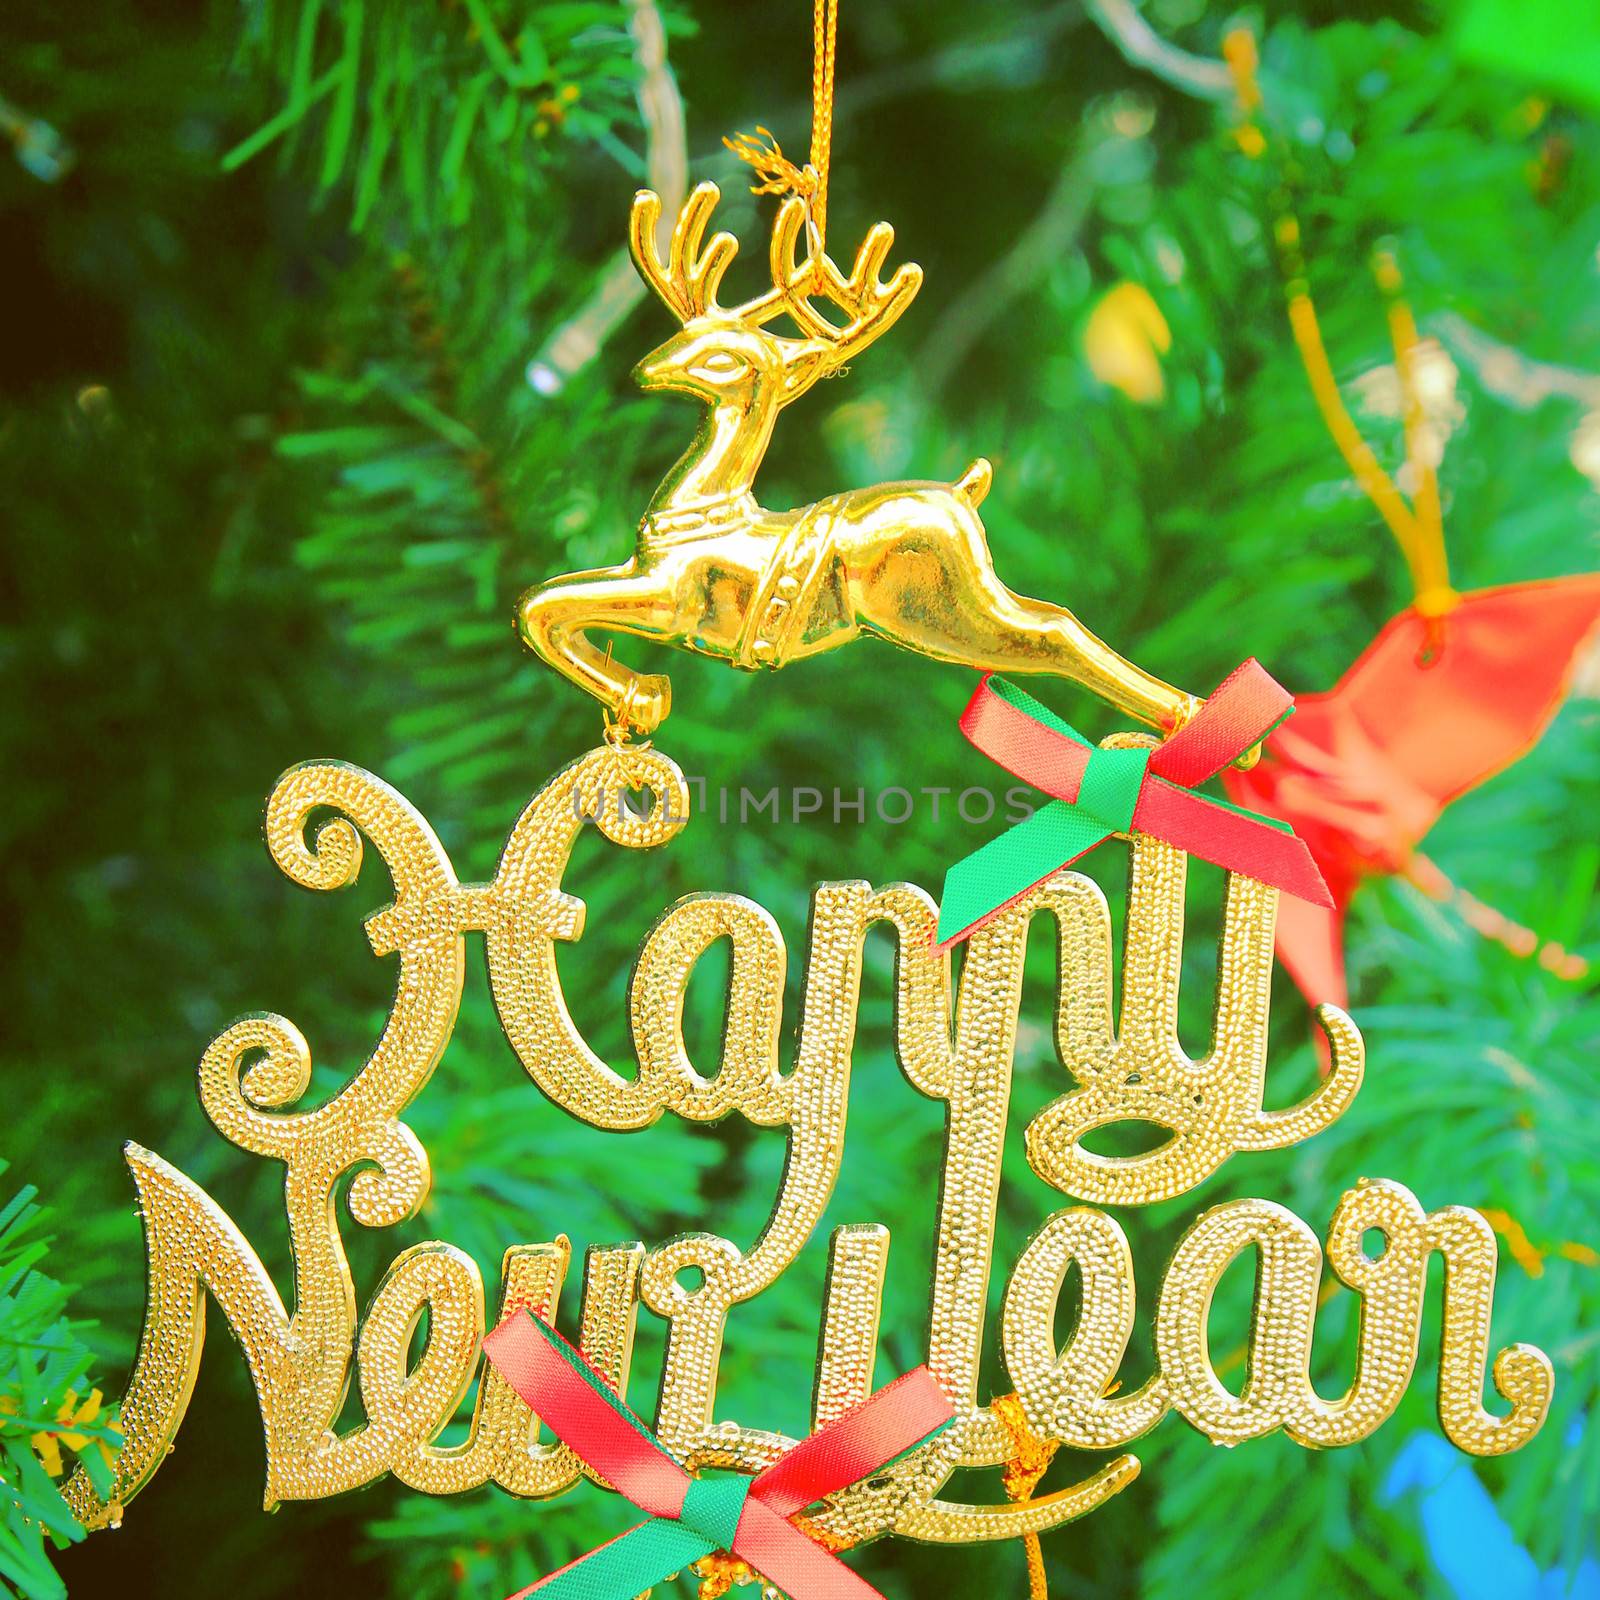 Christmas tree with happy new year decorations, retro filter eff by nuchylee